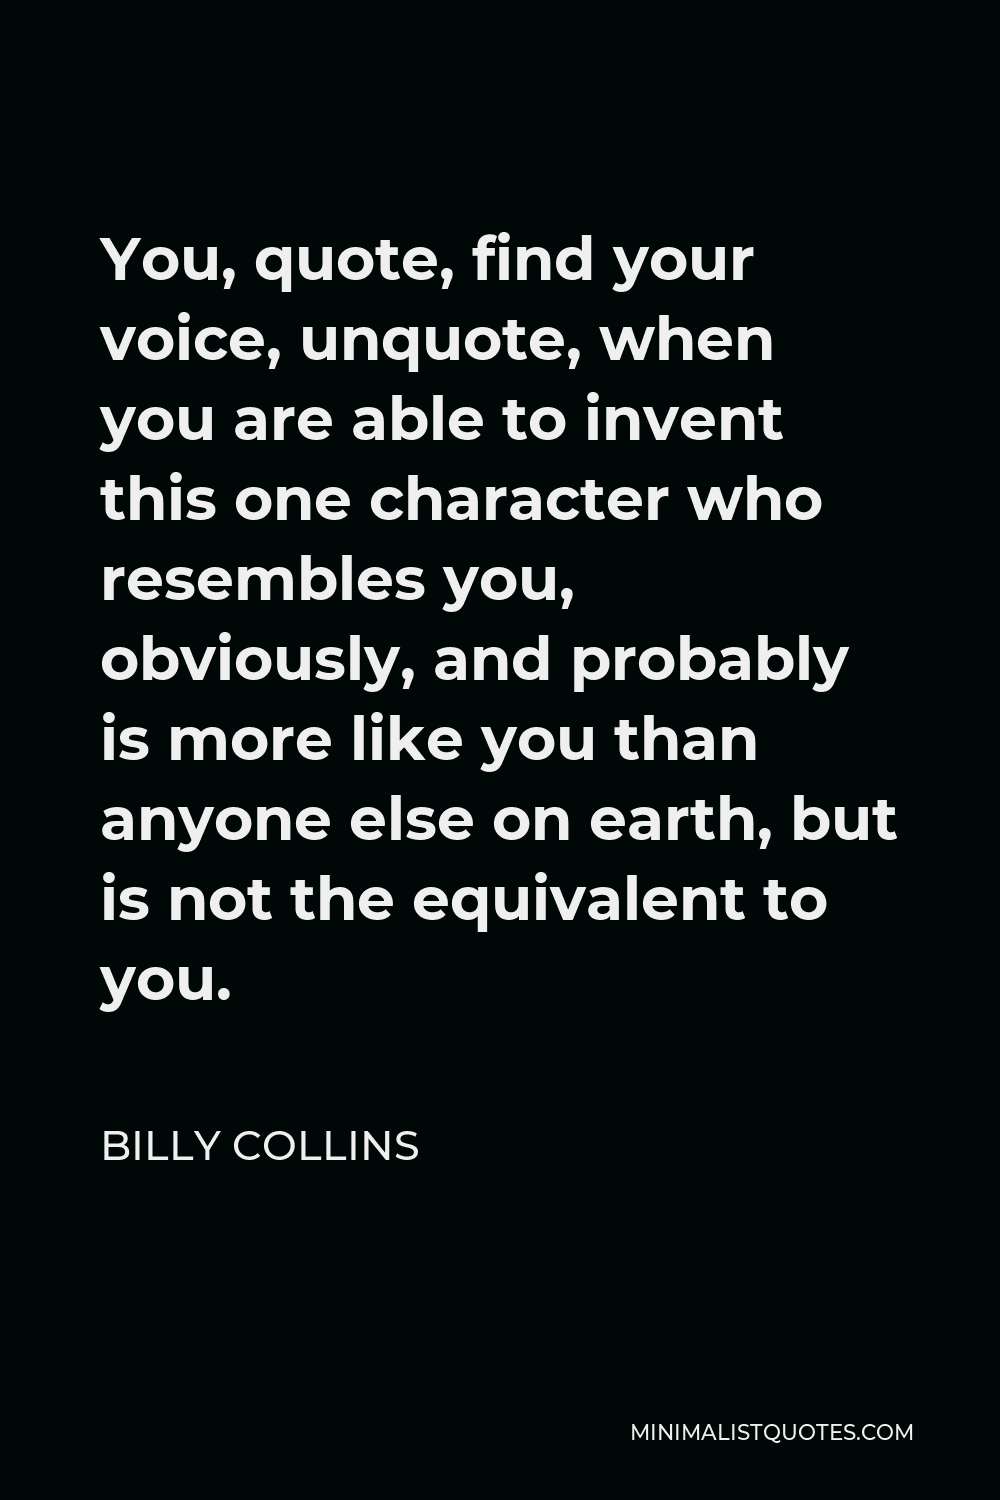 Billy Collins Quote - You, quote, find your voice, unquote, when you are able to invent this one character who resembles you, obviously, and probably is more like you than anyone else on earth, but is not the equivalent to you.